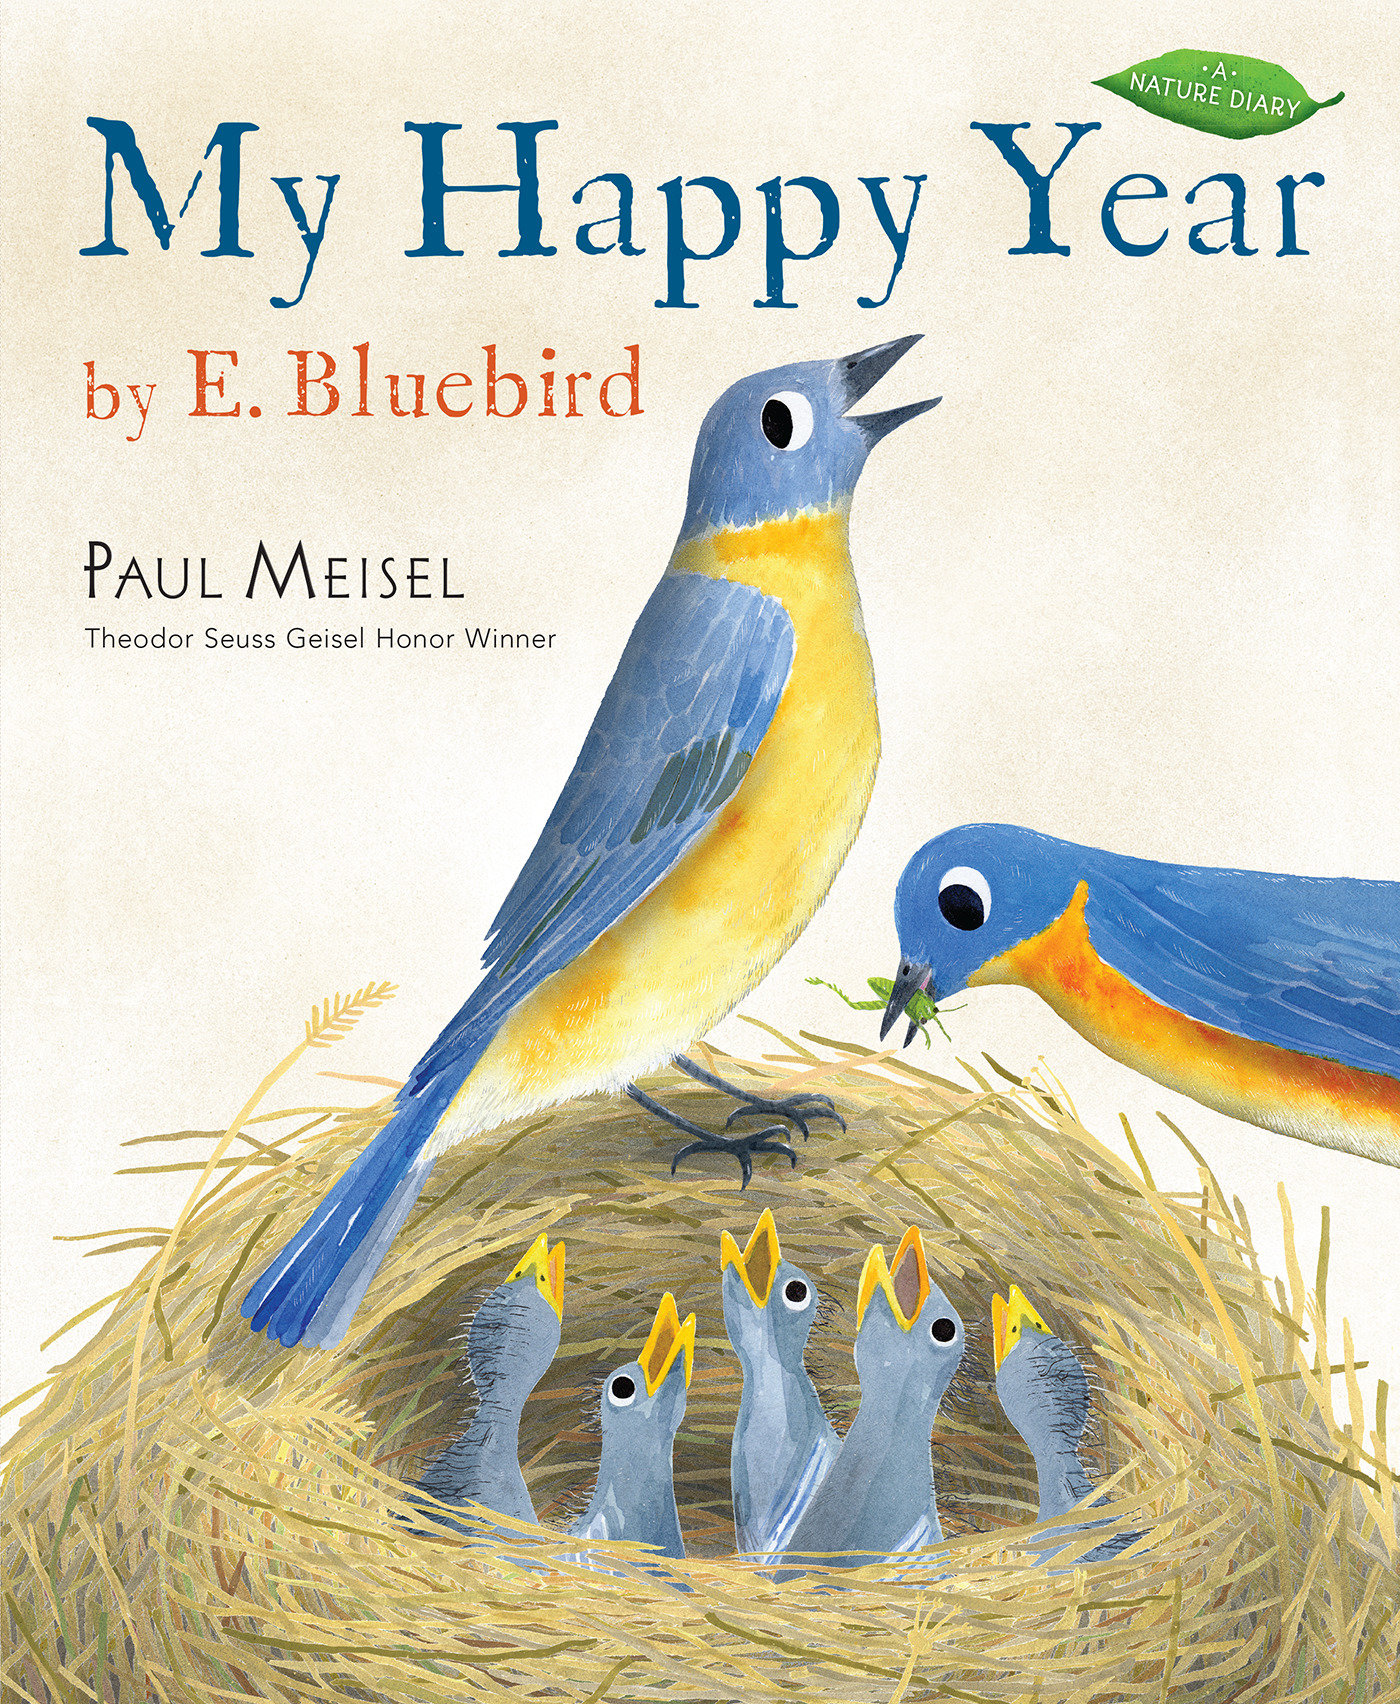 My Happy Year By E.Bluebird (Hardcover Book)